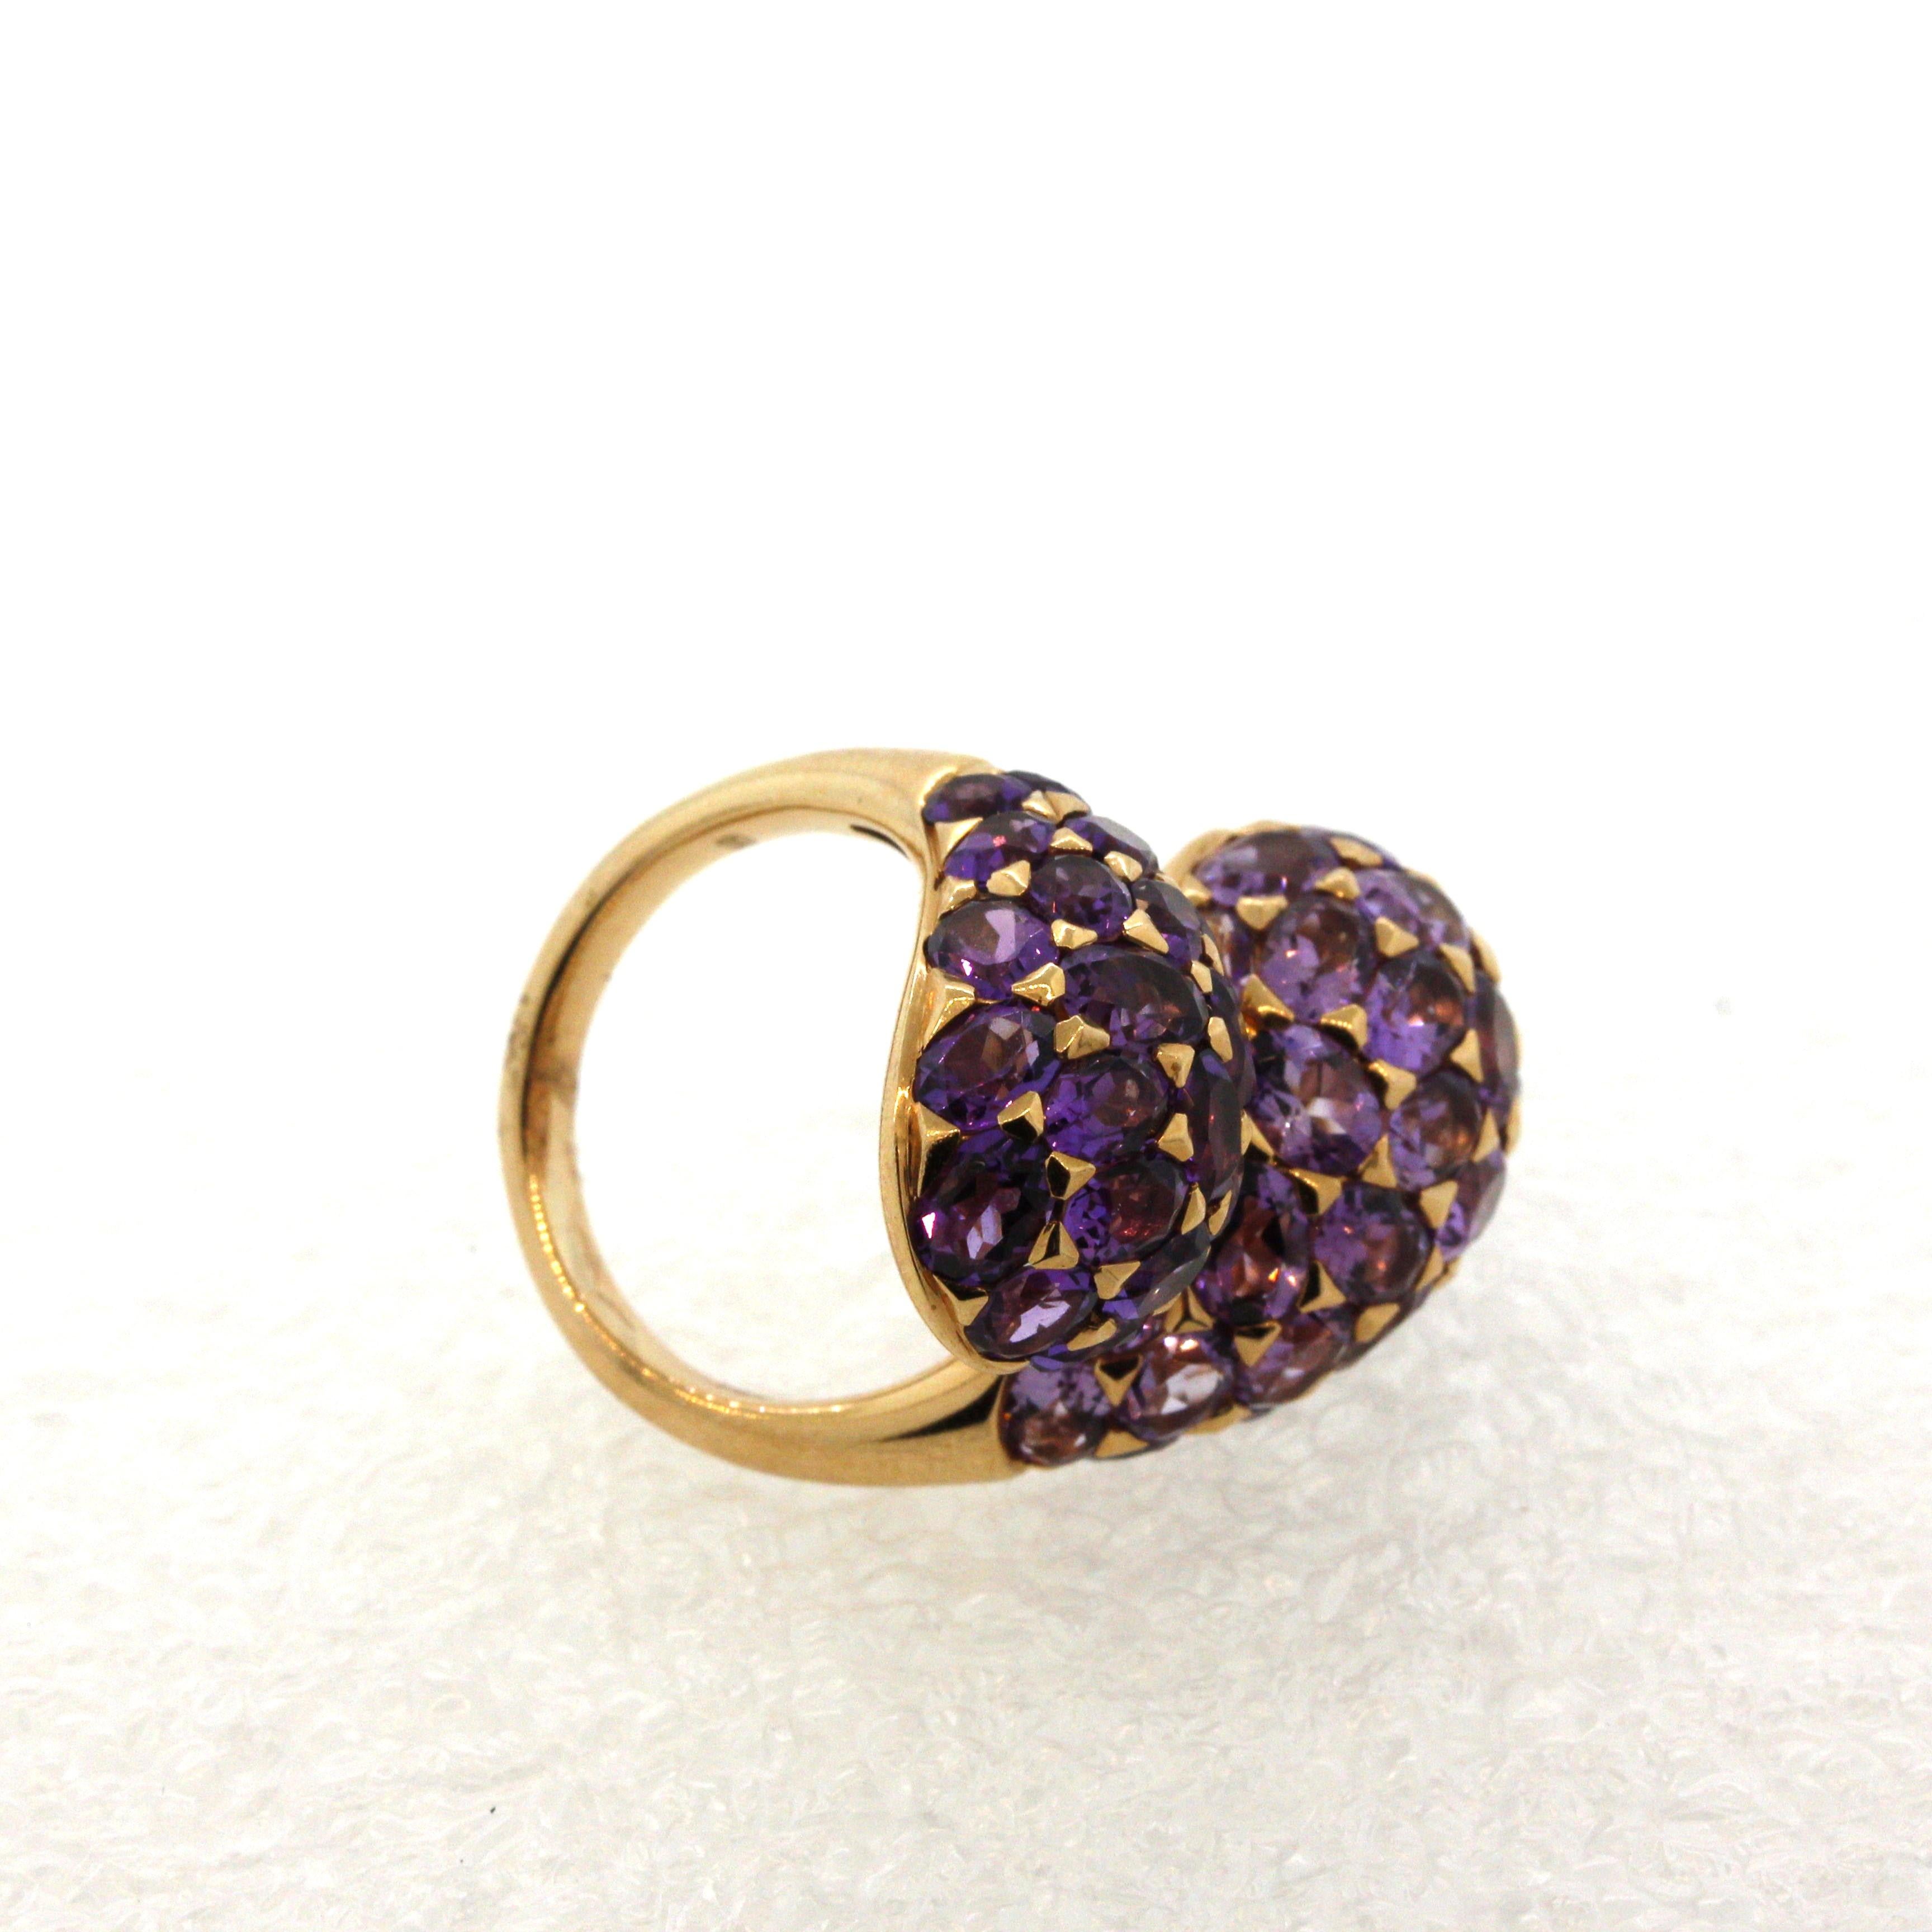 A large, fun, and impressive bypass-style ring featuring 10.86 carats of oval-shape amethyst! The two bypasses possess different shapes of amethyst, one a lighter color while the other a deeper royal purple color. This creates contrast in the piece